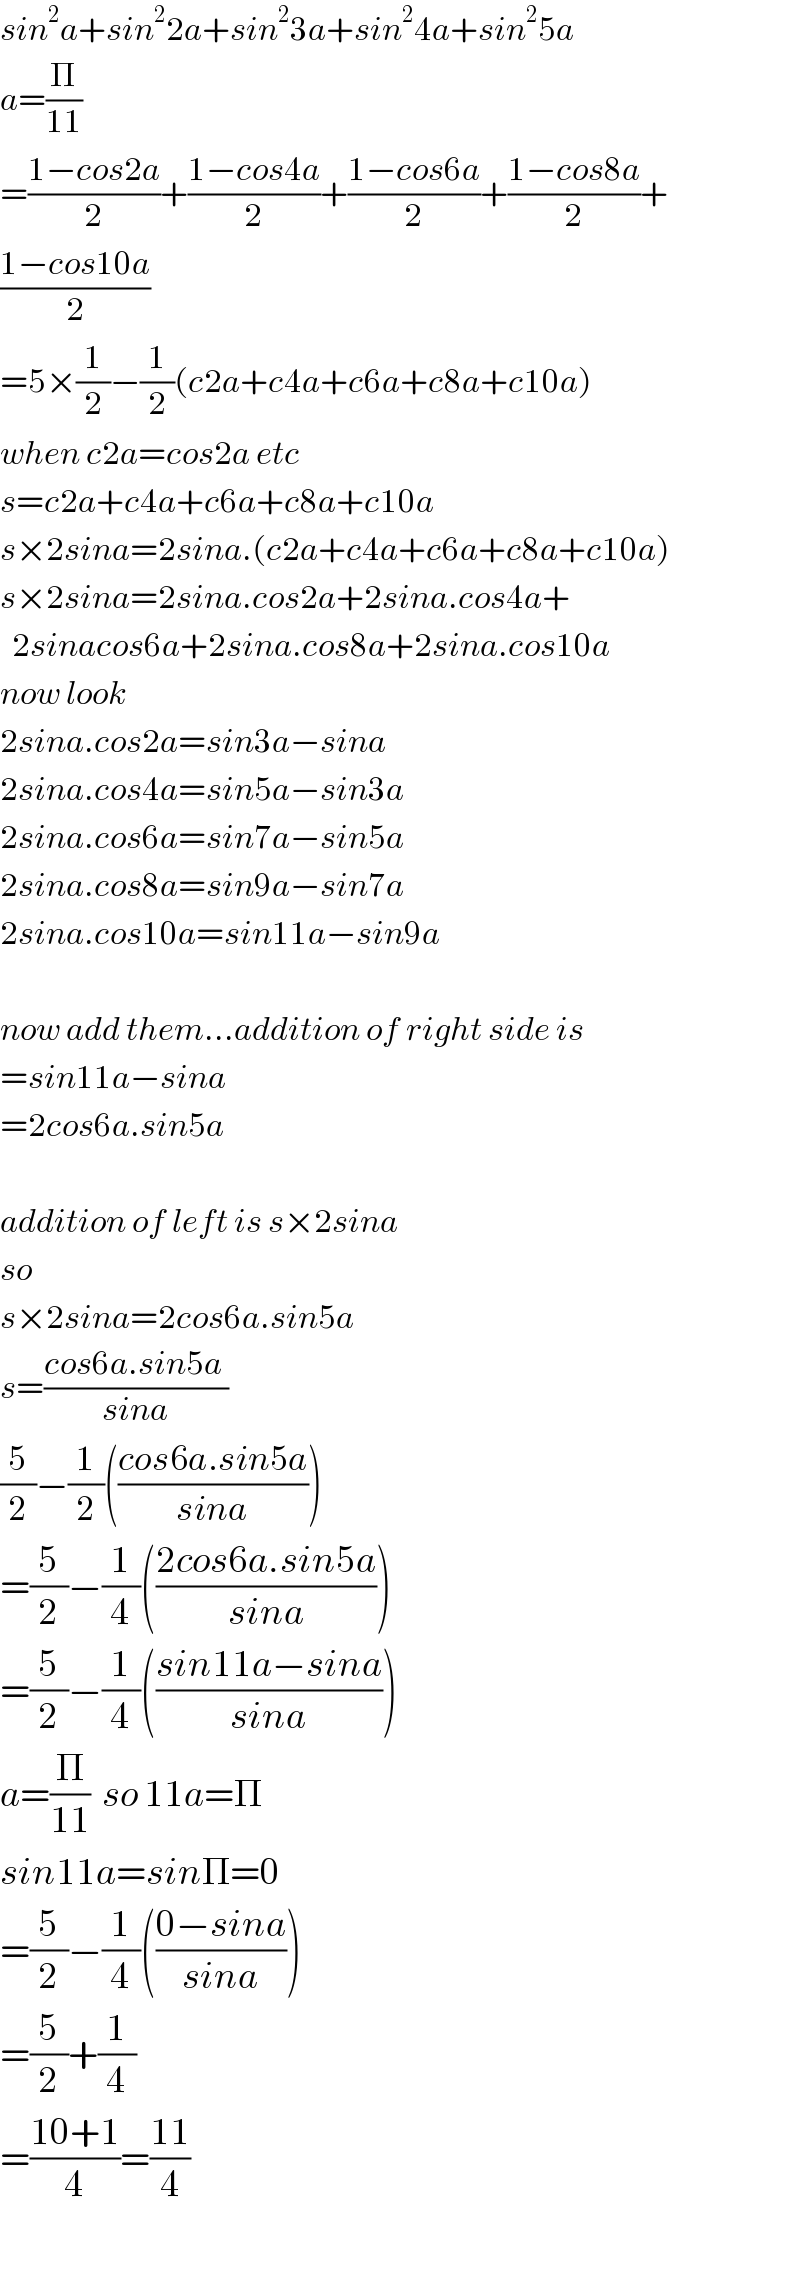 sin^2 a+sin^2 2a+sin^2 3a+sin^2 4a+sin^2 5a  a=(Π/(11))  =((1−cos2a)/2)+((1−cos4a)/2)+((1−cos6a)/2)+((1−cos8a)/2)+  ((1−cos10a)/2)  =5×(1/2)−(1/2)(c2a+c4a+c6a+c8a+c10a)  when c2a=cos2a etc  s=c2a+c4a+c6a+c8a+c10a  s×2sina=2sina.(c2a+c4a+c6a+c8a+c10a)  s×2sina=2sina.cos2a+2sina.cos4a+    2sinacos6a+2sina.cos8a+2sina.cos10a  now look  2sina.cos2a=sin3a−sina  2sina.cos4a=sin5a−sin3a  2sina.cos6a=sin7a−sin5a  2sina.cos8a=sin9a−sin7a  2sina.cos10a=sin11a−sin9a    now add them...addition of right side is  =sin11a−sina  =2cos6a.sin5a    addition of left is s×2sina  so  s×2sina=2cos6a.sin5a  s=((cos6a.sin5a )/(sina))  (5/2)−(1/2)(((cos6a.sin5a)/(sina)))  =(5/2)−(1/4)(((2cos6a.sin5a)/(sina)))  =(5/2)−(1/4)(((sin11a−sina)/(sina)))  a=(Π/(11))  so 11a=Π  sin11a=sinΠ=0  =(5/2)−(1/4)(((0−sina)/(sina)))  =(5/2)+(1/4)  =((10+1)/4)=((11)/4)    